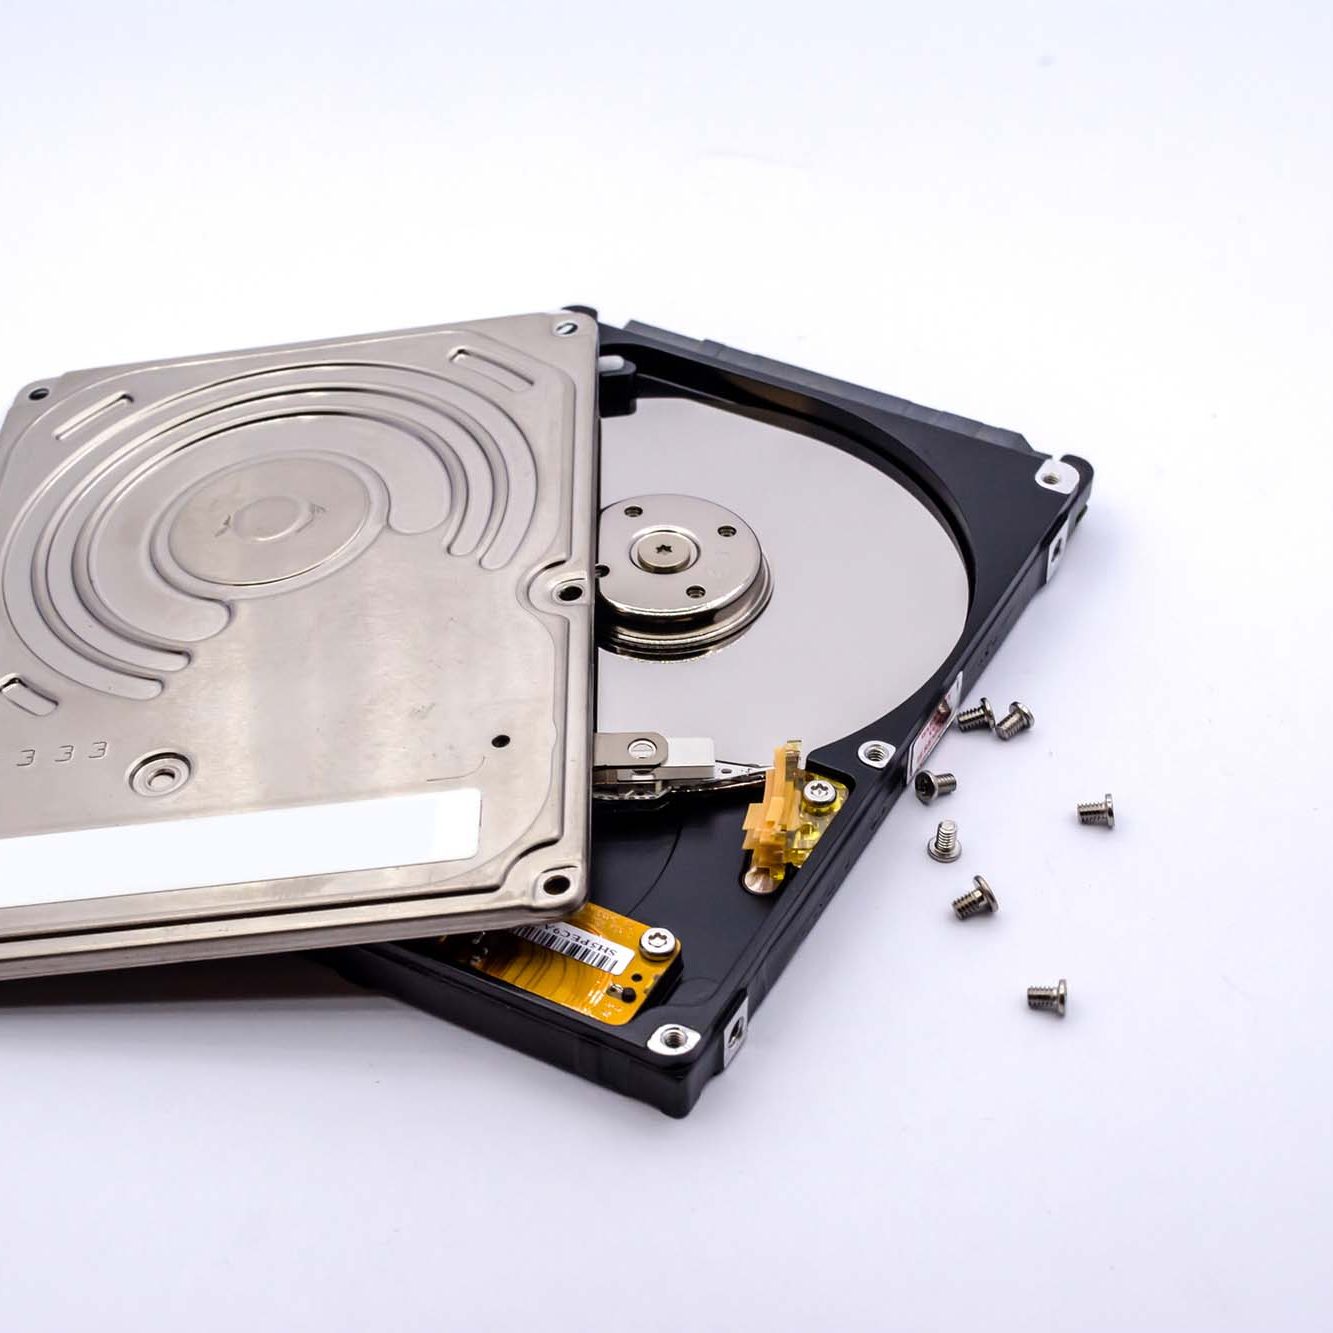 Data Recovery In Surrey, London, & Surrounding Areas